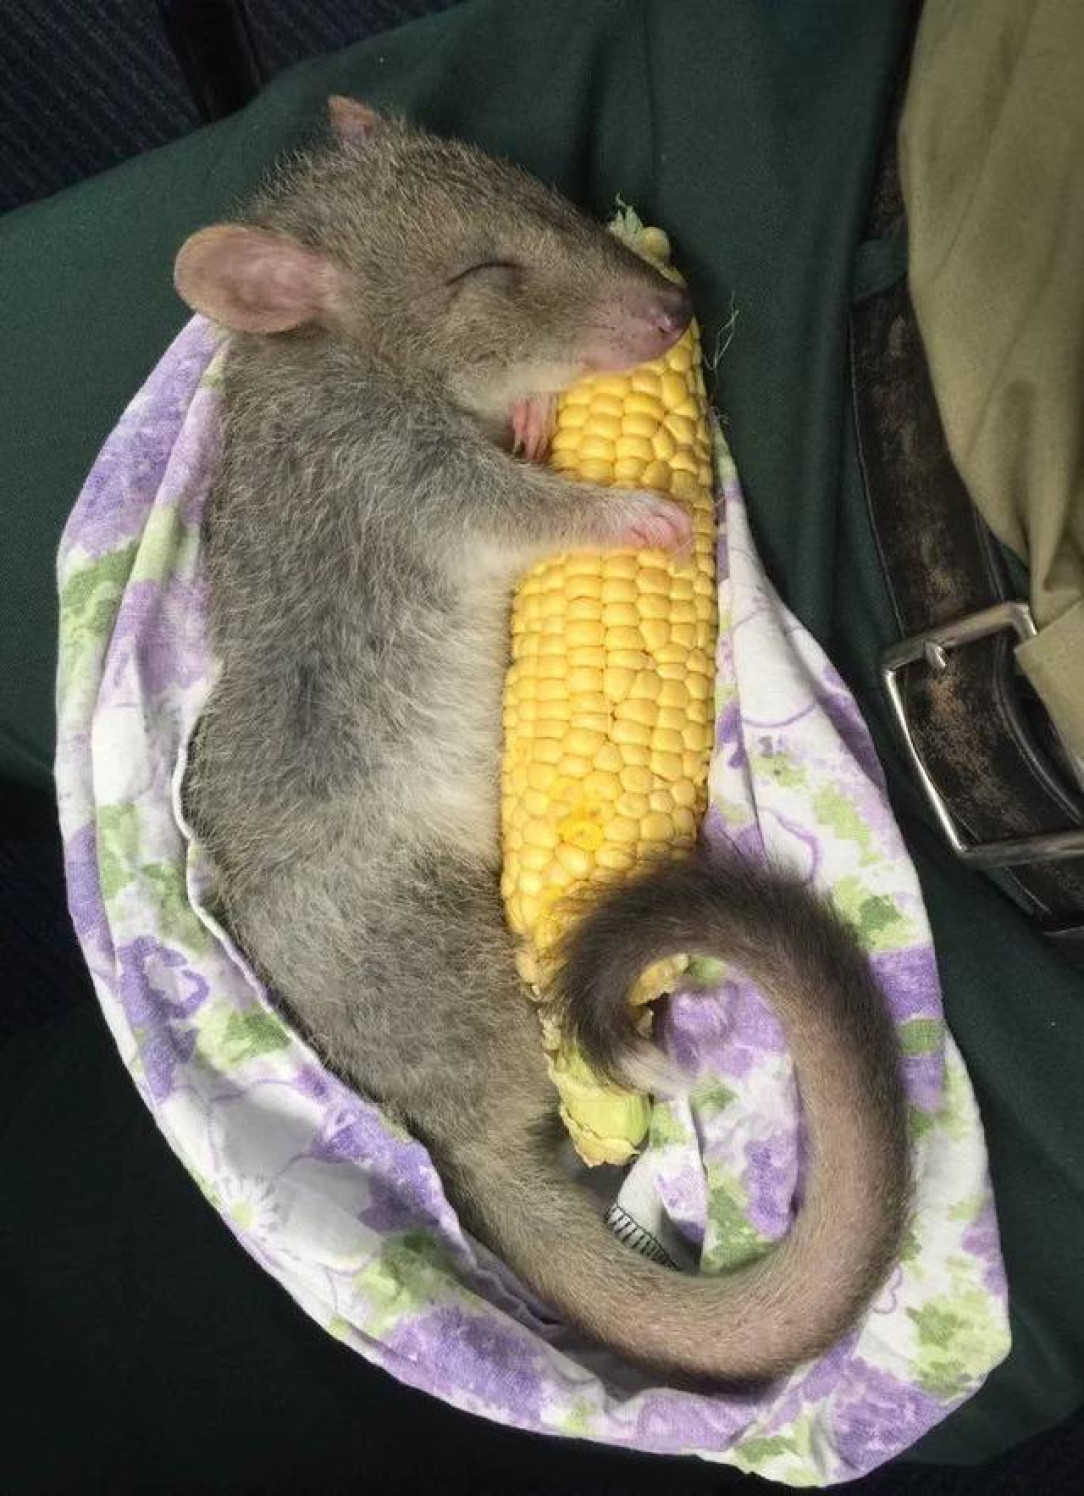 Baby Bettong holding a corn